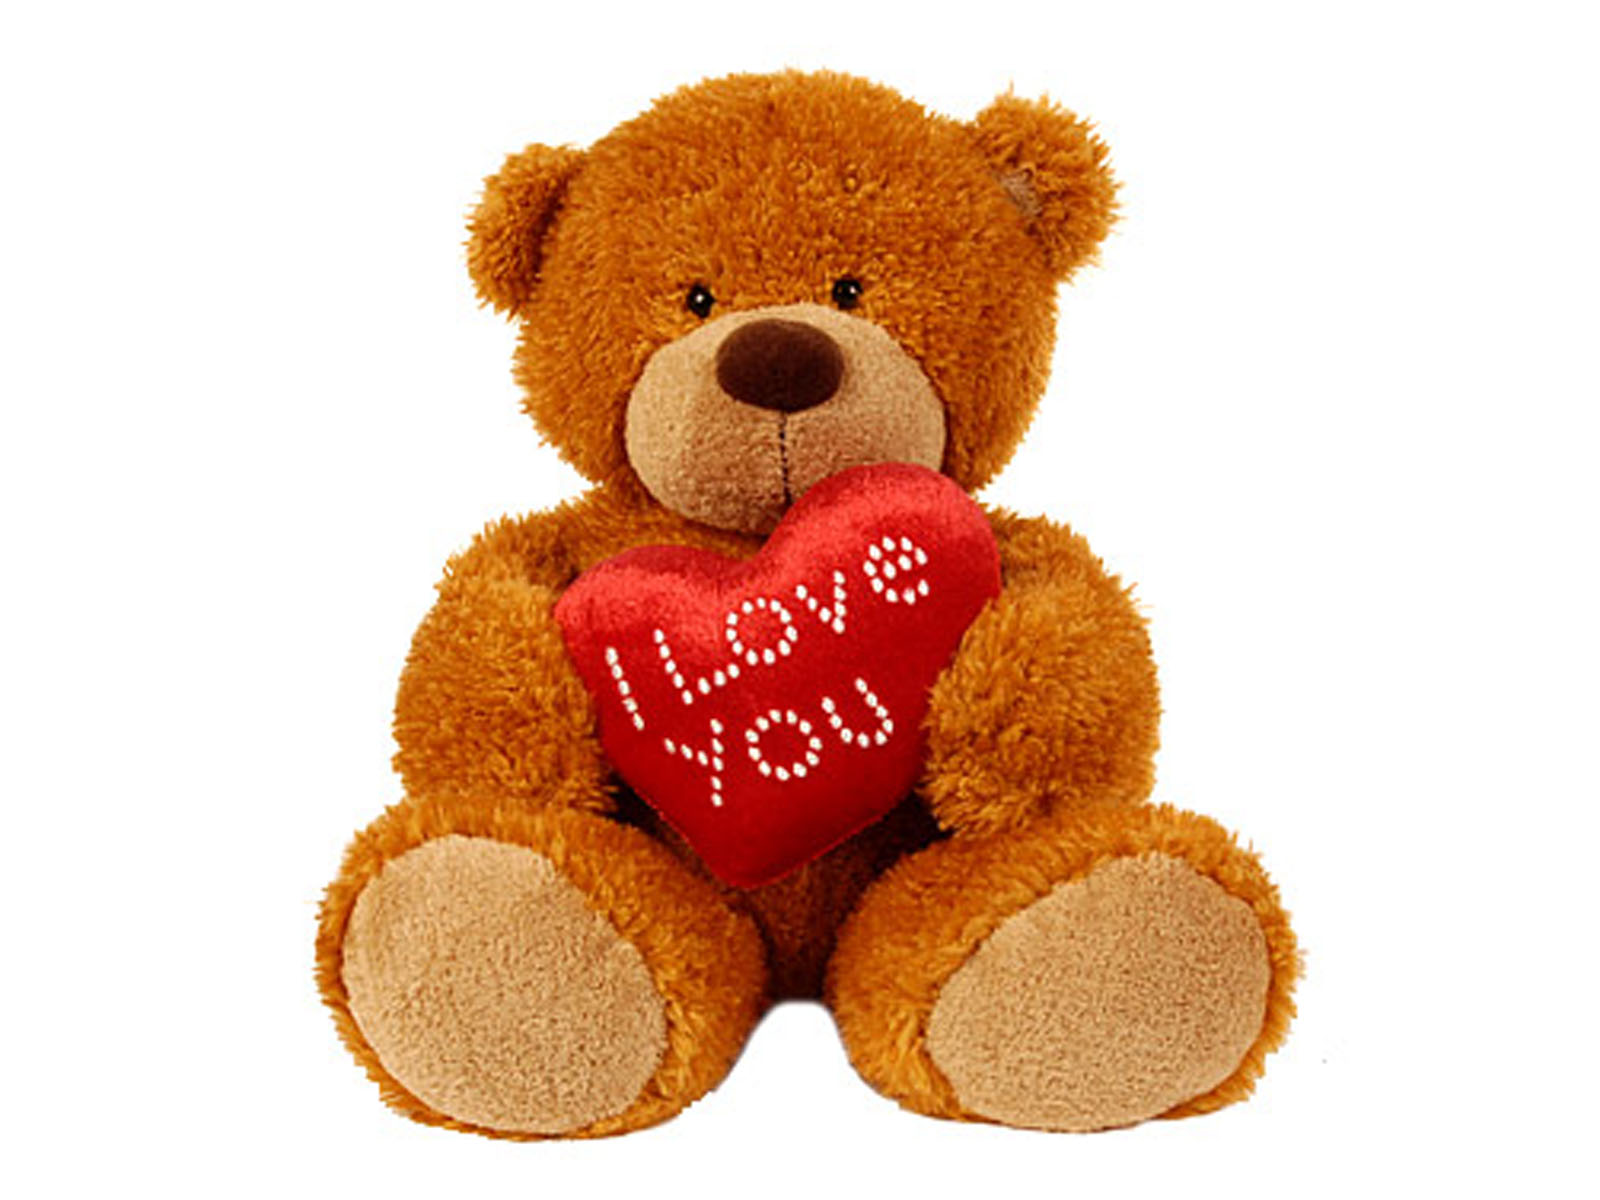 And Colorful Love Teddy Bear Wallpaper Of S